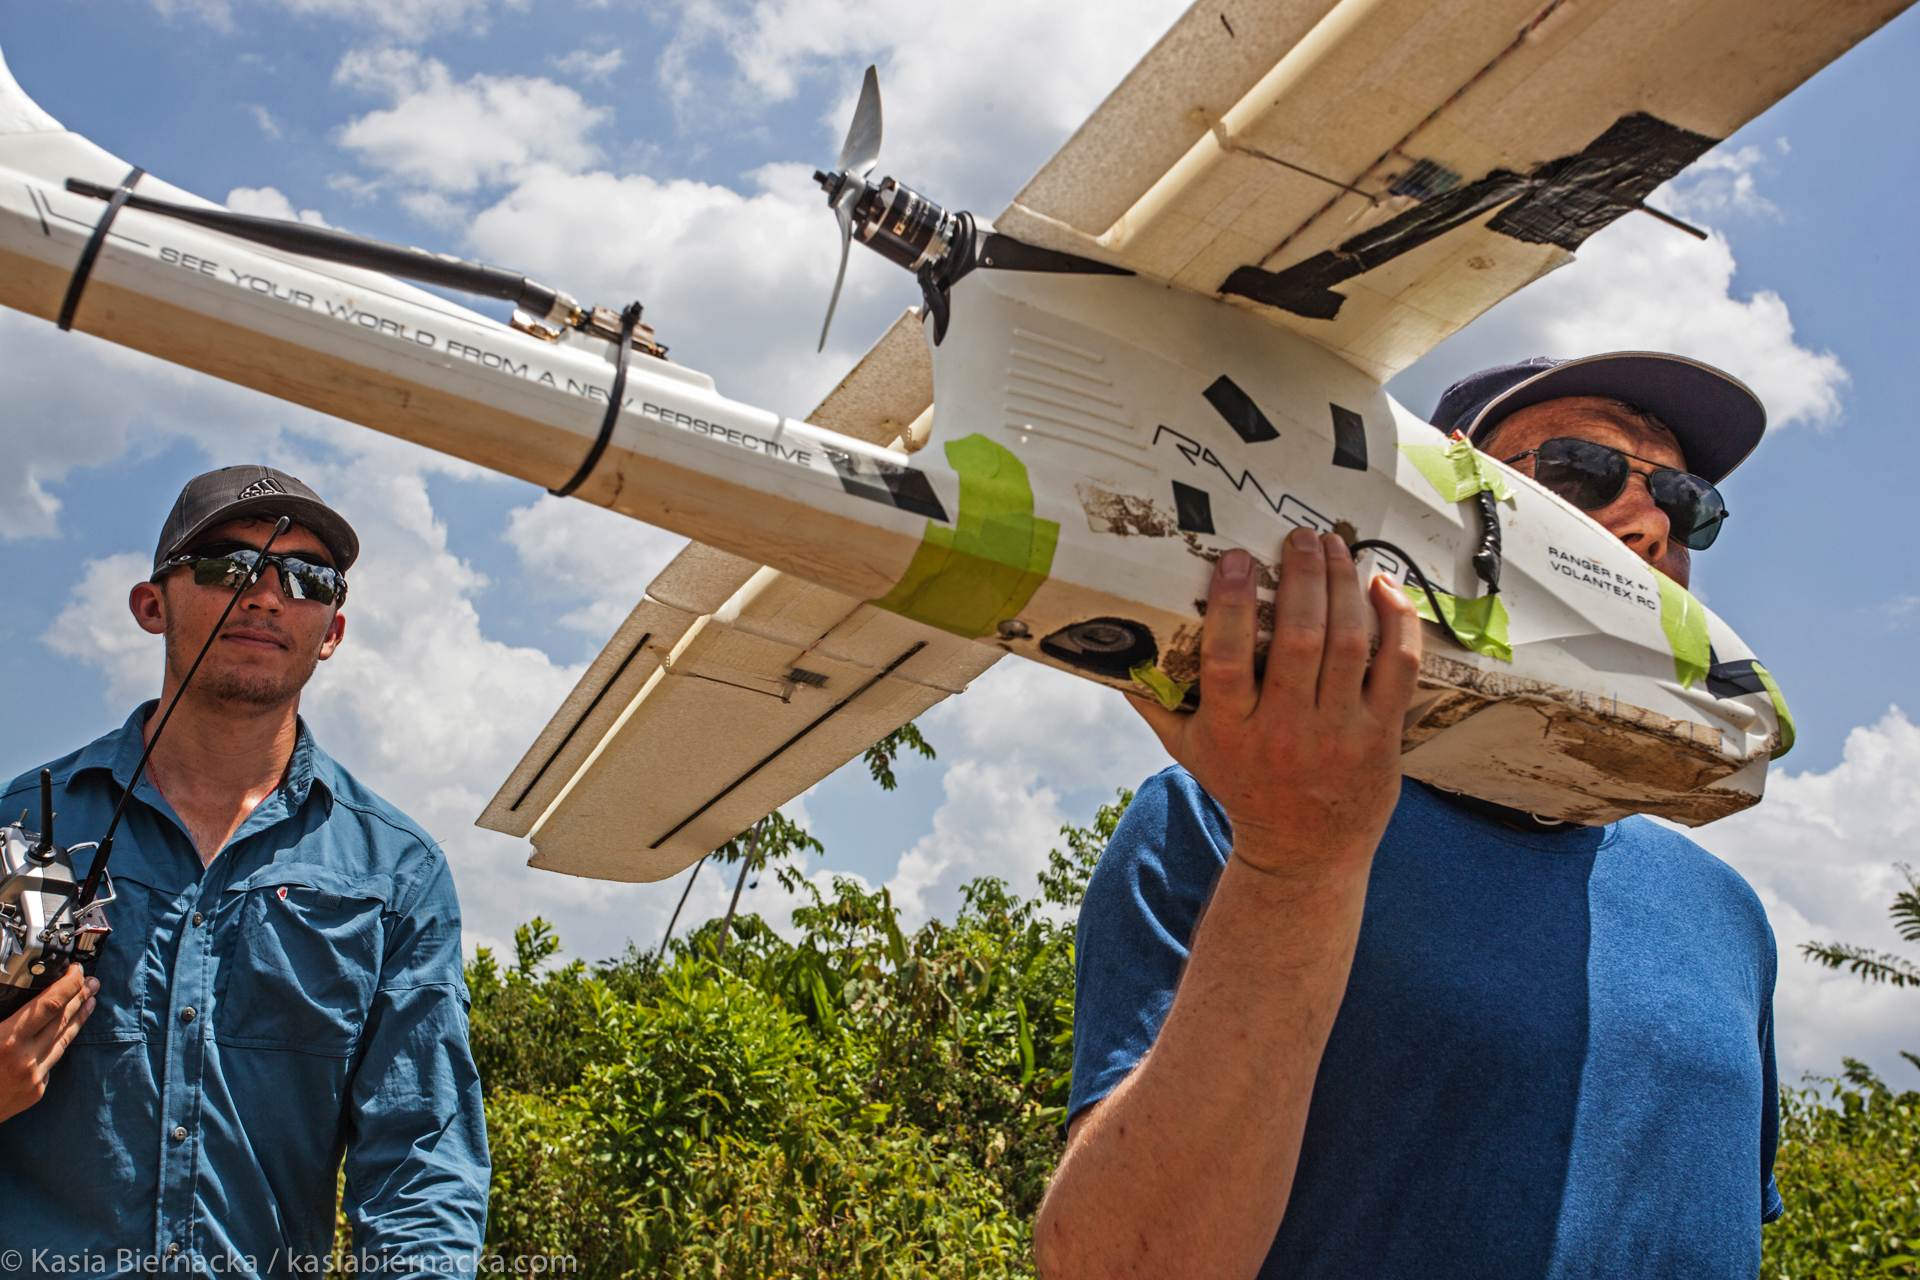 Afshari and Schurgers preparing for an aerial mapping mission (photo credit: Kasia Biernacka)